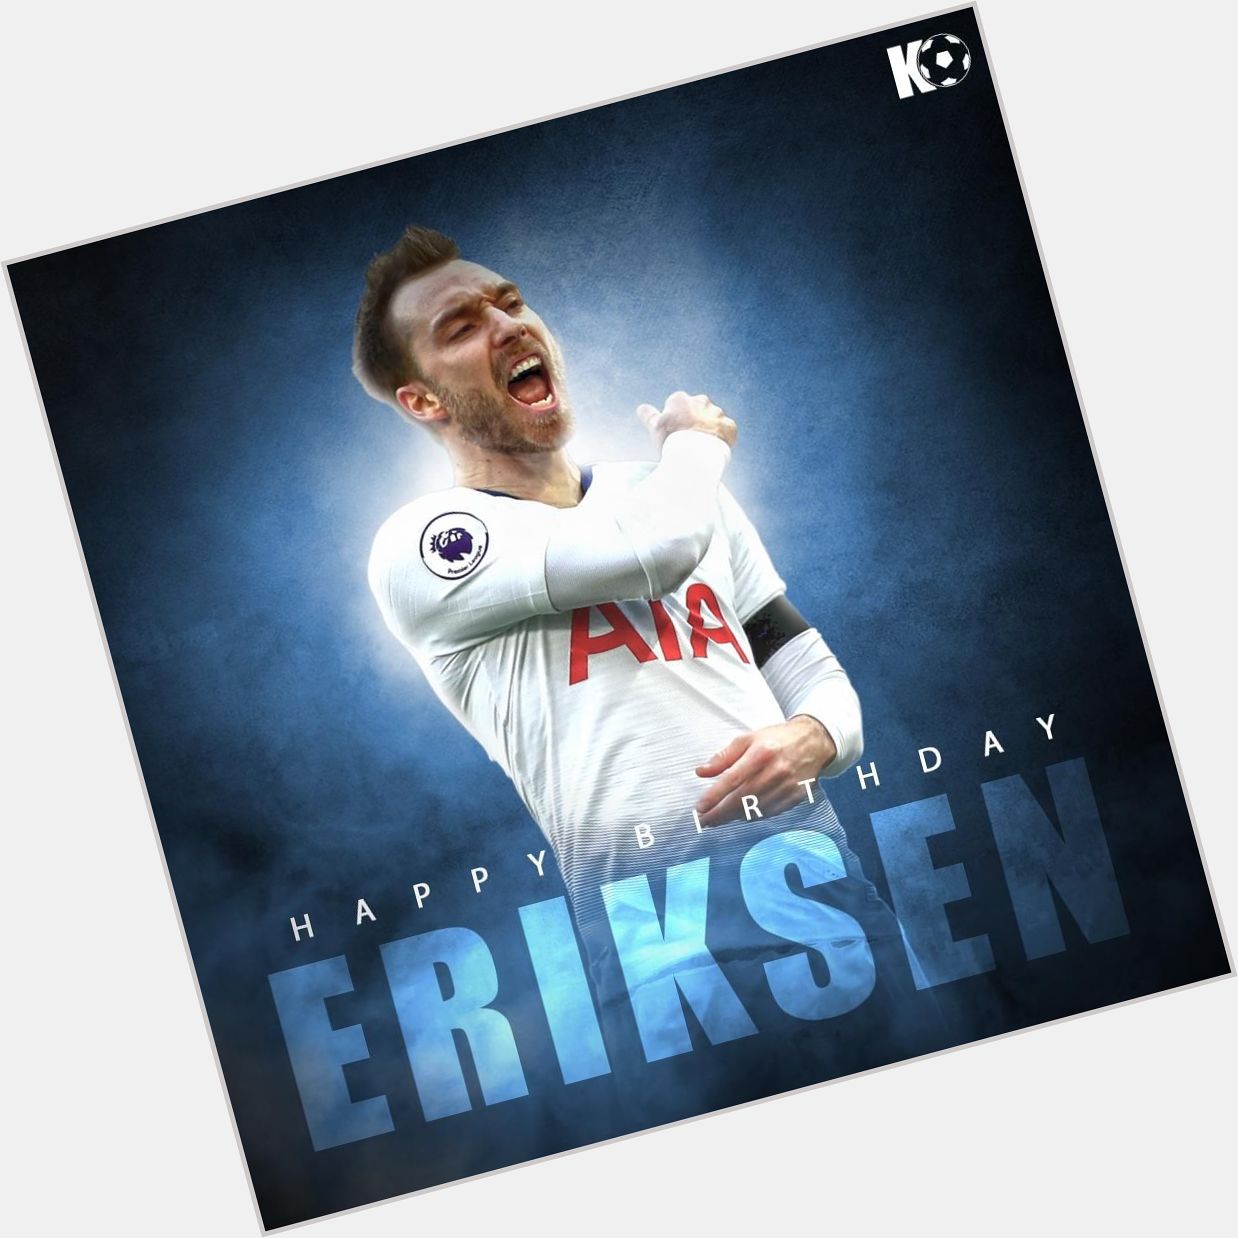 The Tottenham Hotspur star turns 27 today! Join in wishing Christian Eriksen a Happy Birthday 